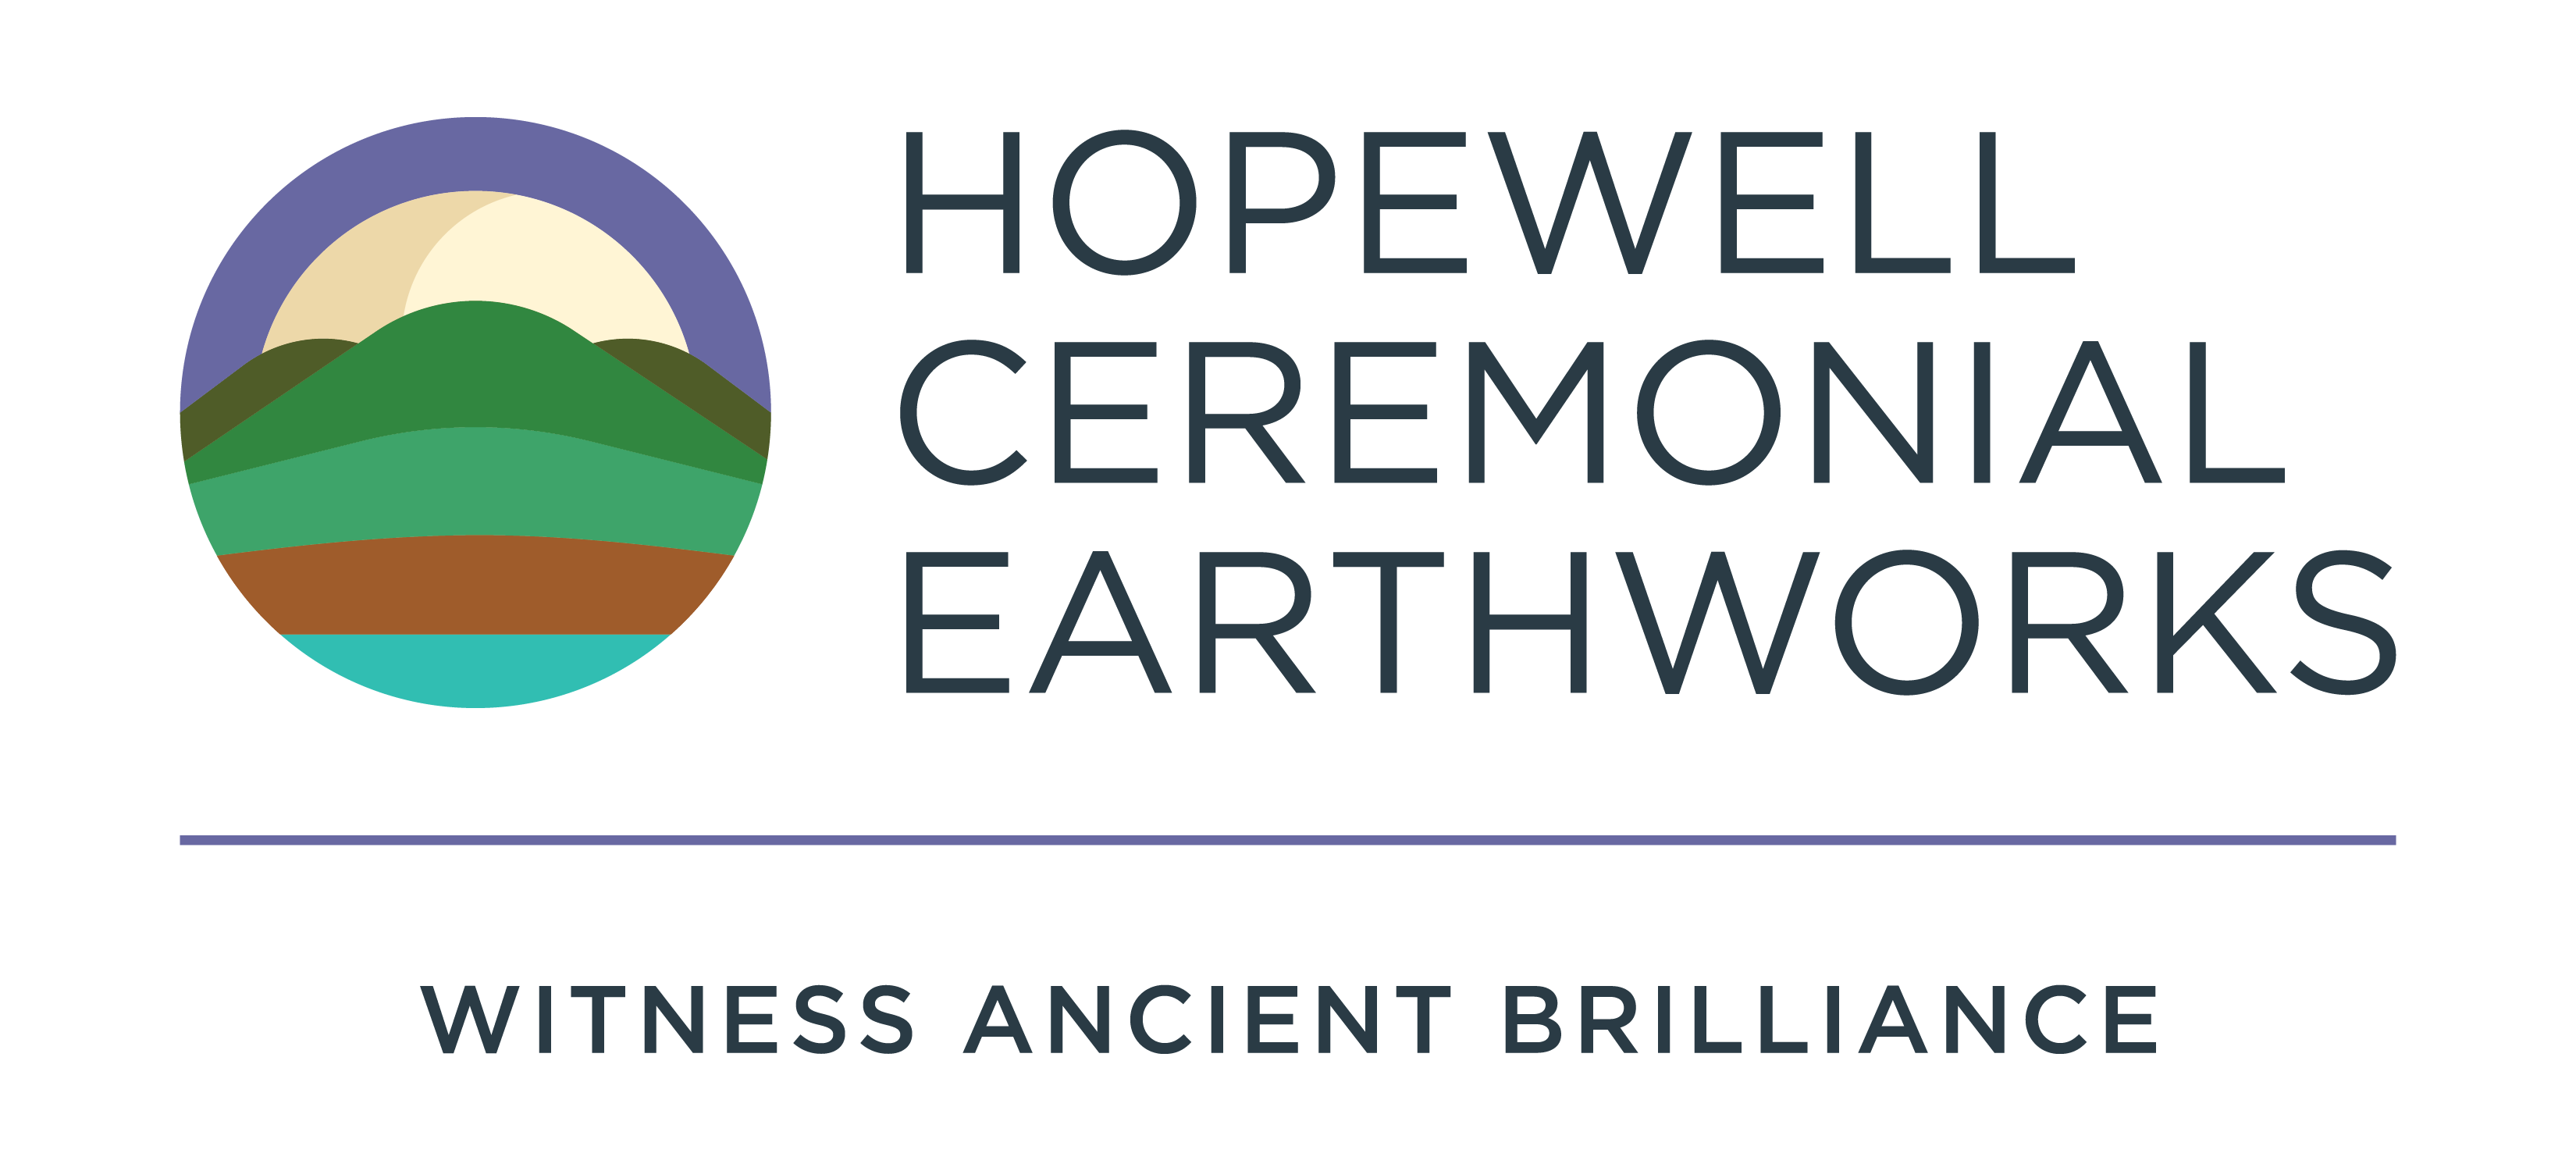 Hopewell Ceremonial Earthworks logo and design.